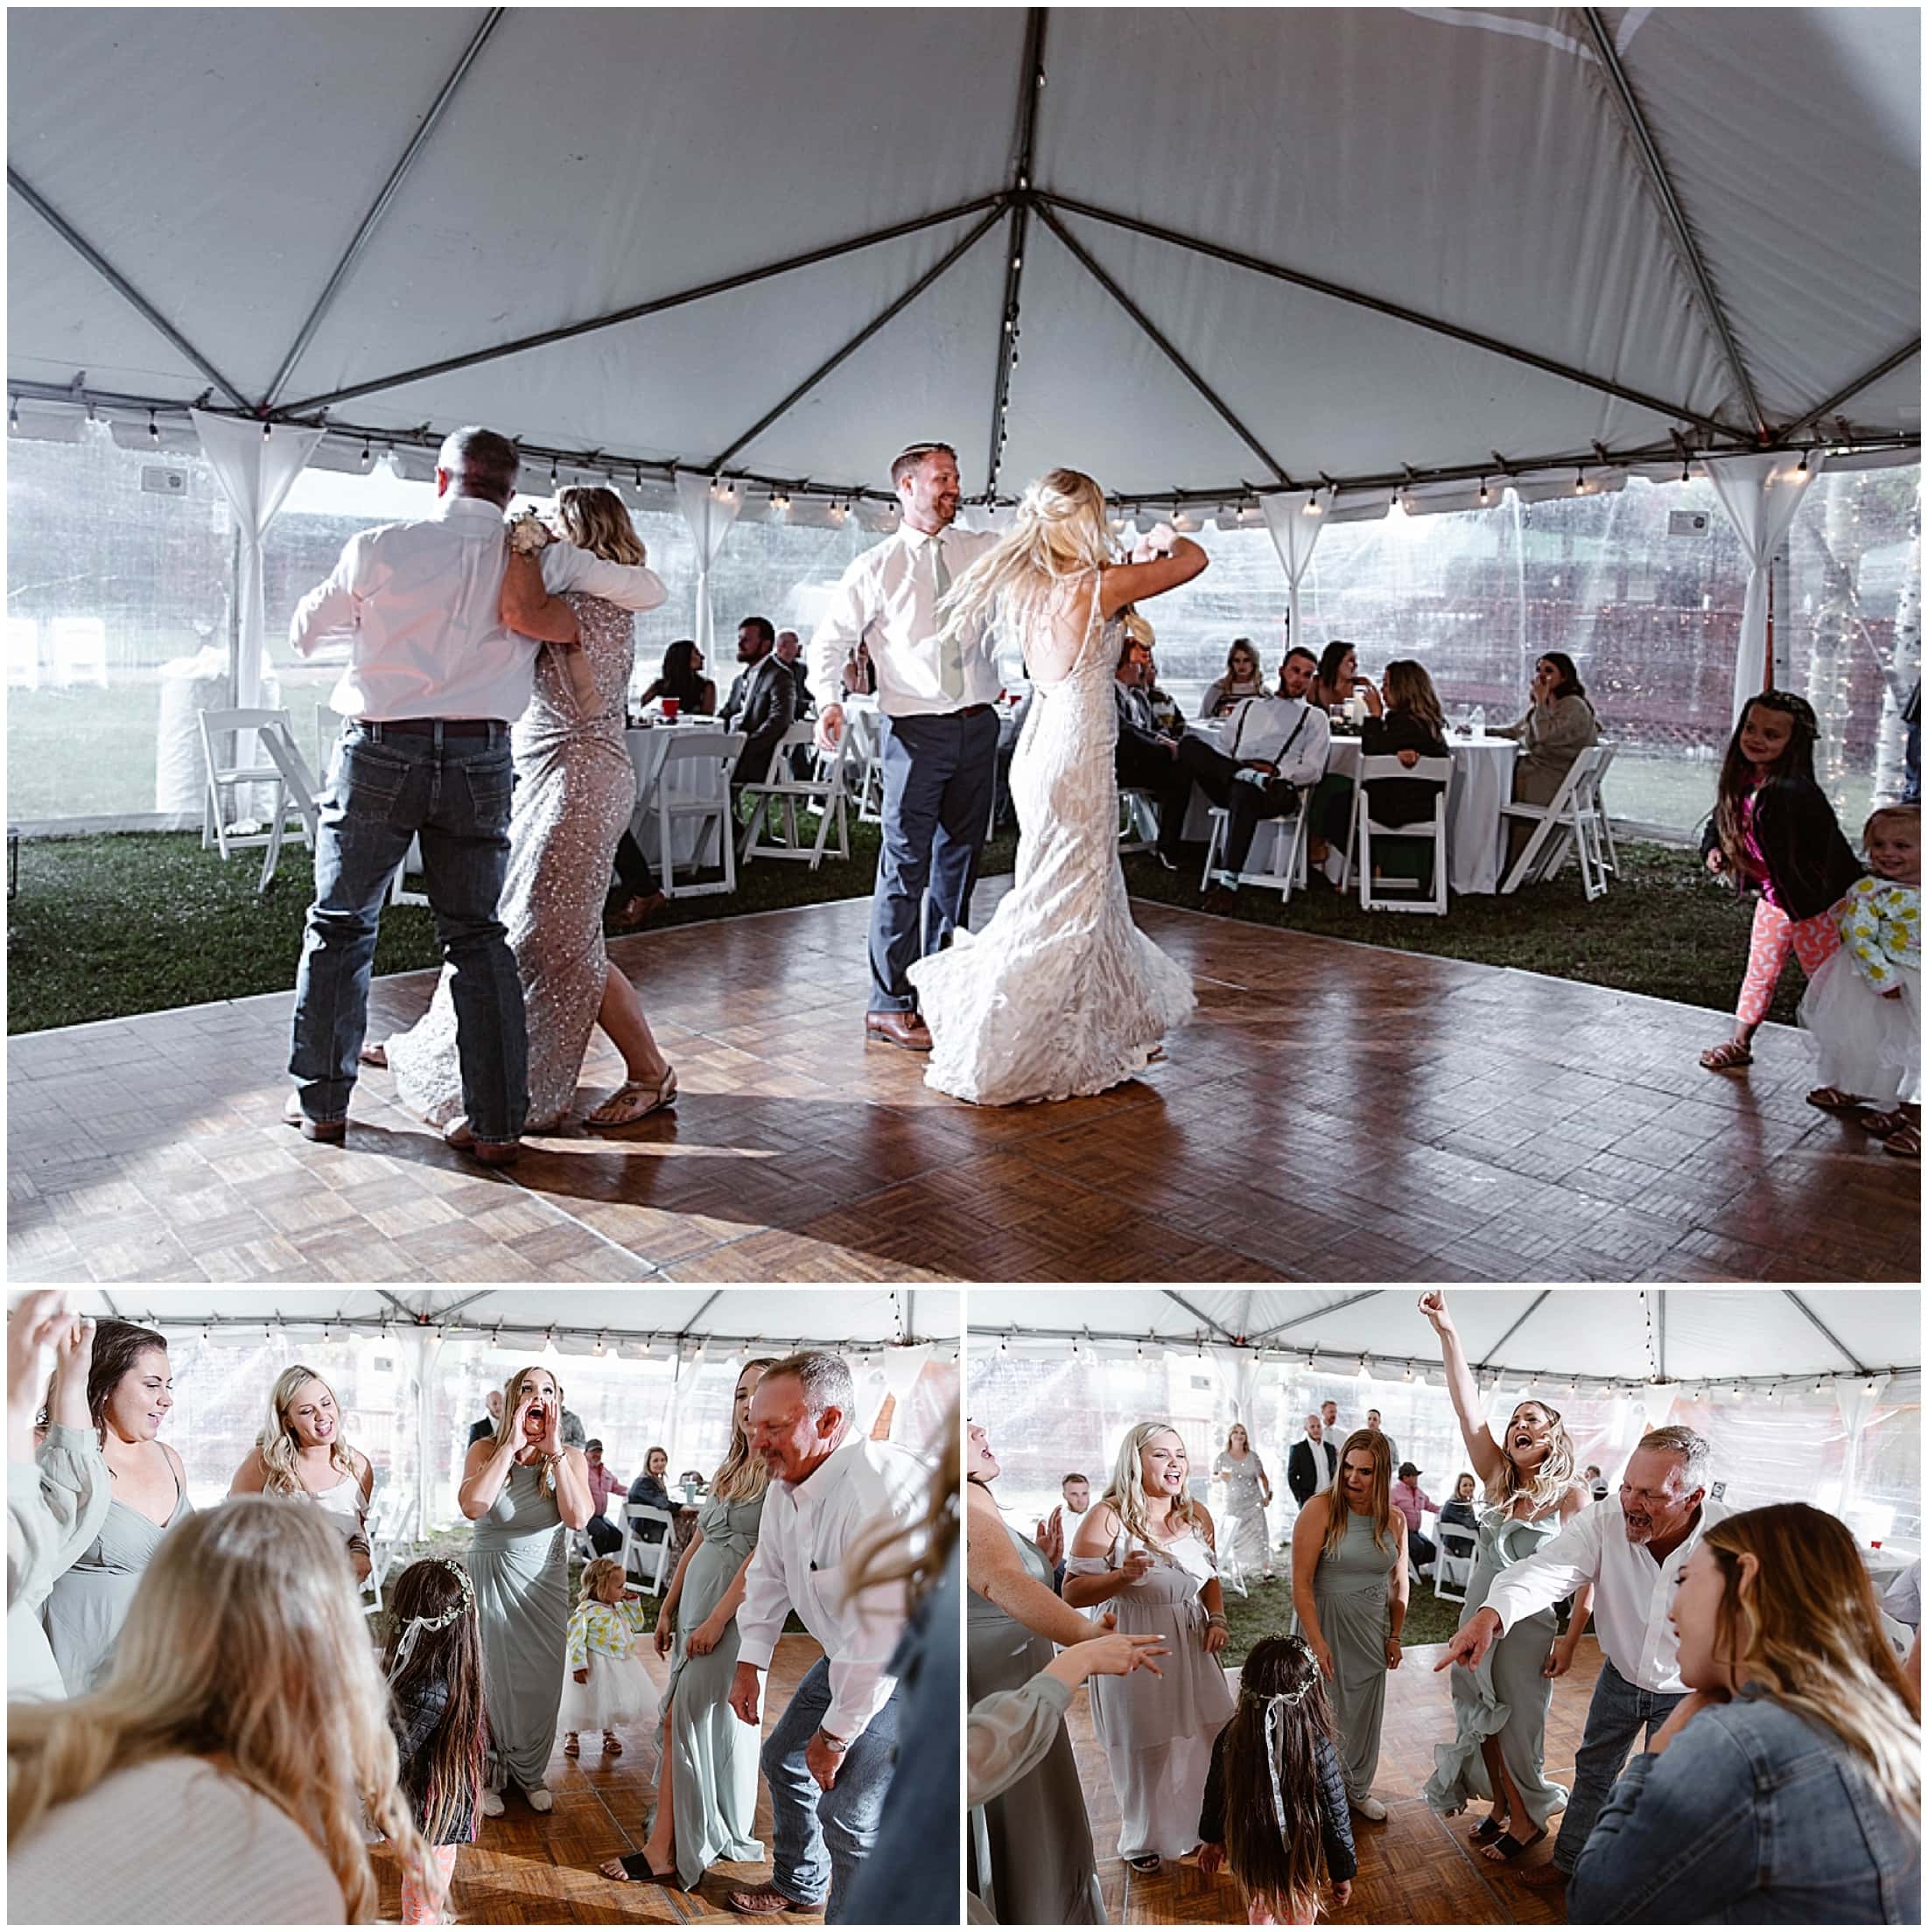 bridal party and guests dancing at wedding, Aspen Lodge, Red River New Mexico, Red River New Mexico Wedding, Weddings in New Mexico, Destination mountain wedding, destination mountain elopement, elopements in new mexico, places to get married in new mexico, destination elopement photographer, mountain wedding photographer, new mexico wedding photographer, new mexico elopement photographer, brit nicole photography, cabin wedding, new mexico cabin wedding, mountain landscape for wedding, small intimate mountain wedding, small intimate river wedding, wedding photographer in new mexico, junebug weddings, the knot, wedding wire, 41 productions with lindsay gomez, dallas texas bride, DJ Allen Gallegos, Tao Cakes, New Mexico Wedding planner karen kelly, barnes jewelry, Lillian West bridal dress, Lang’s Bridal, enchanted florist wedding flowers, places to get married in texas, texas wedding photographer, texas elopement photographer, forest wedding, forest elopement, wooded area for wedding, wooded elopement, elopement in the woods, amarillo wedding photographer, amarillo elopement photographer